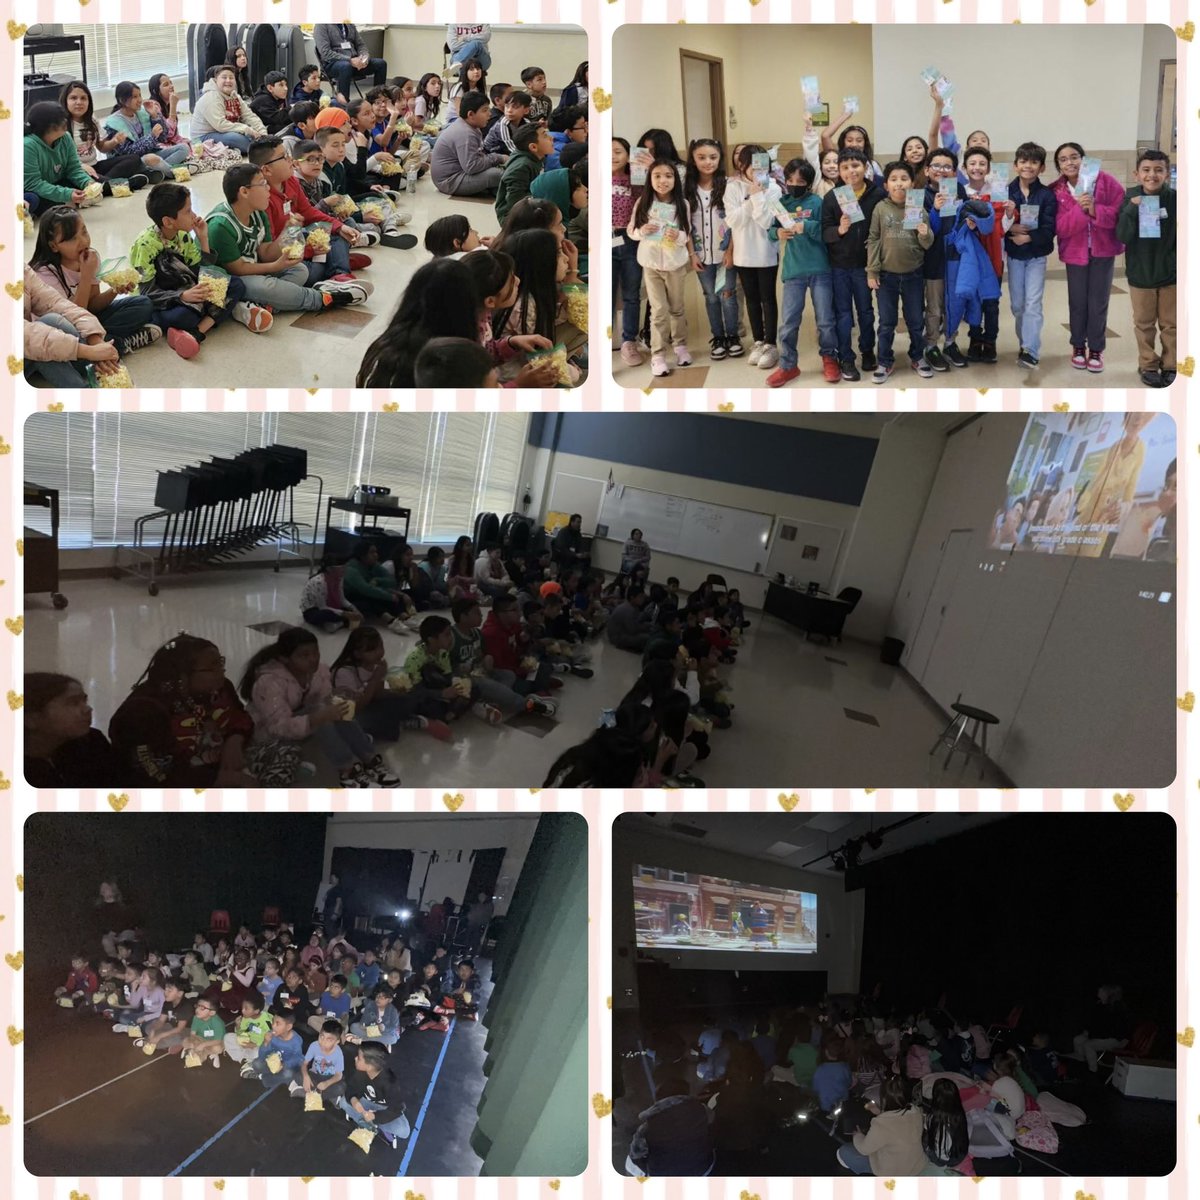 Celebrating perfect attendance @DelValleES_YISD Students enjoying their popcorn while having fun watching a movie. #THEDISTRICT #WeDeliverExcellence @maritza08OFOD @NAstorga_APMME @tippih833 @oceans80 @OFOD